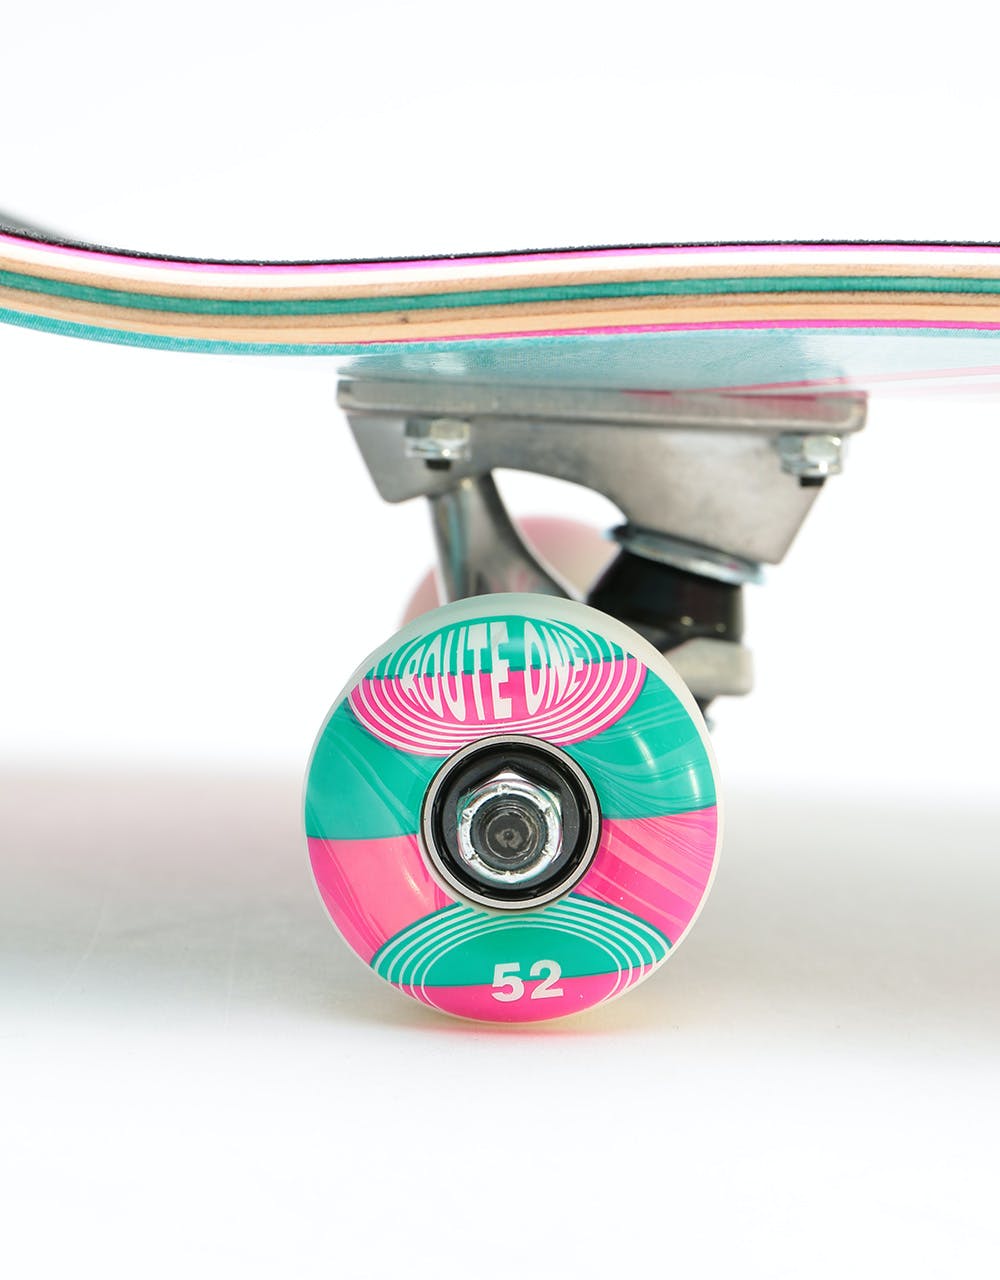 Route One Fish Eye Complete Skateboard - 7.75"